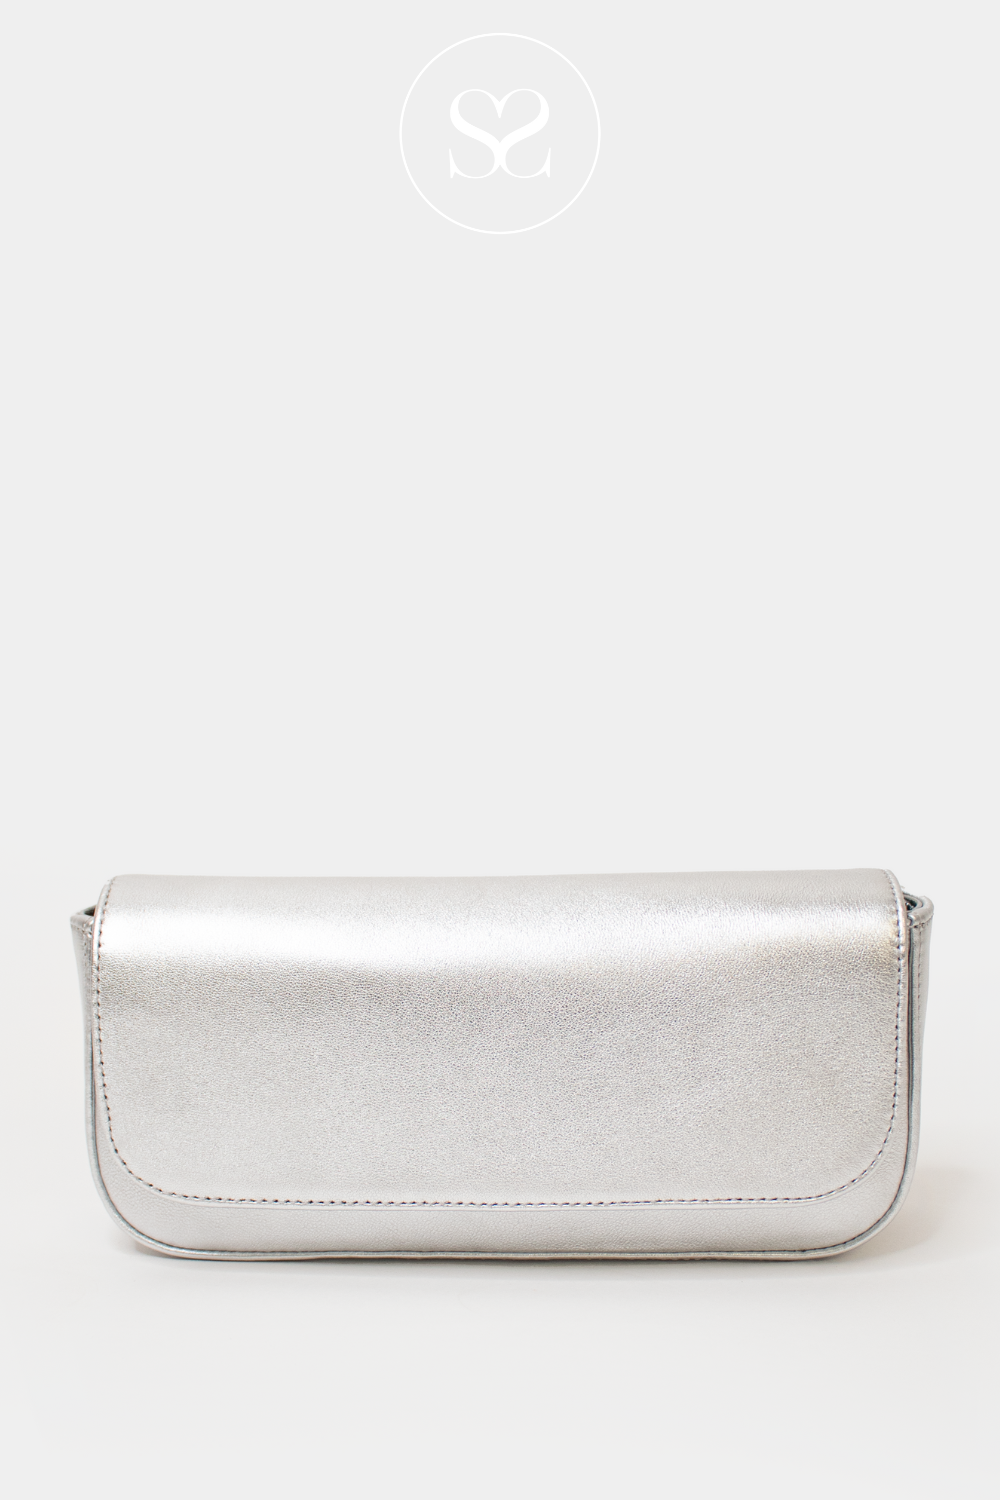 SILVER CLUTCH  BAG FROM UNISA